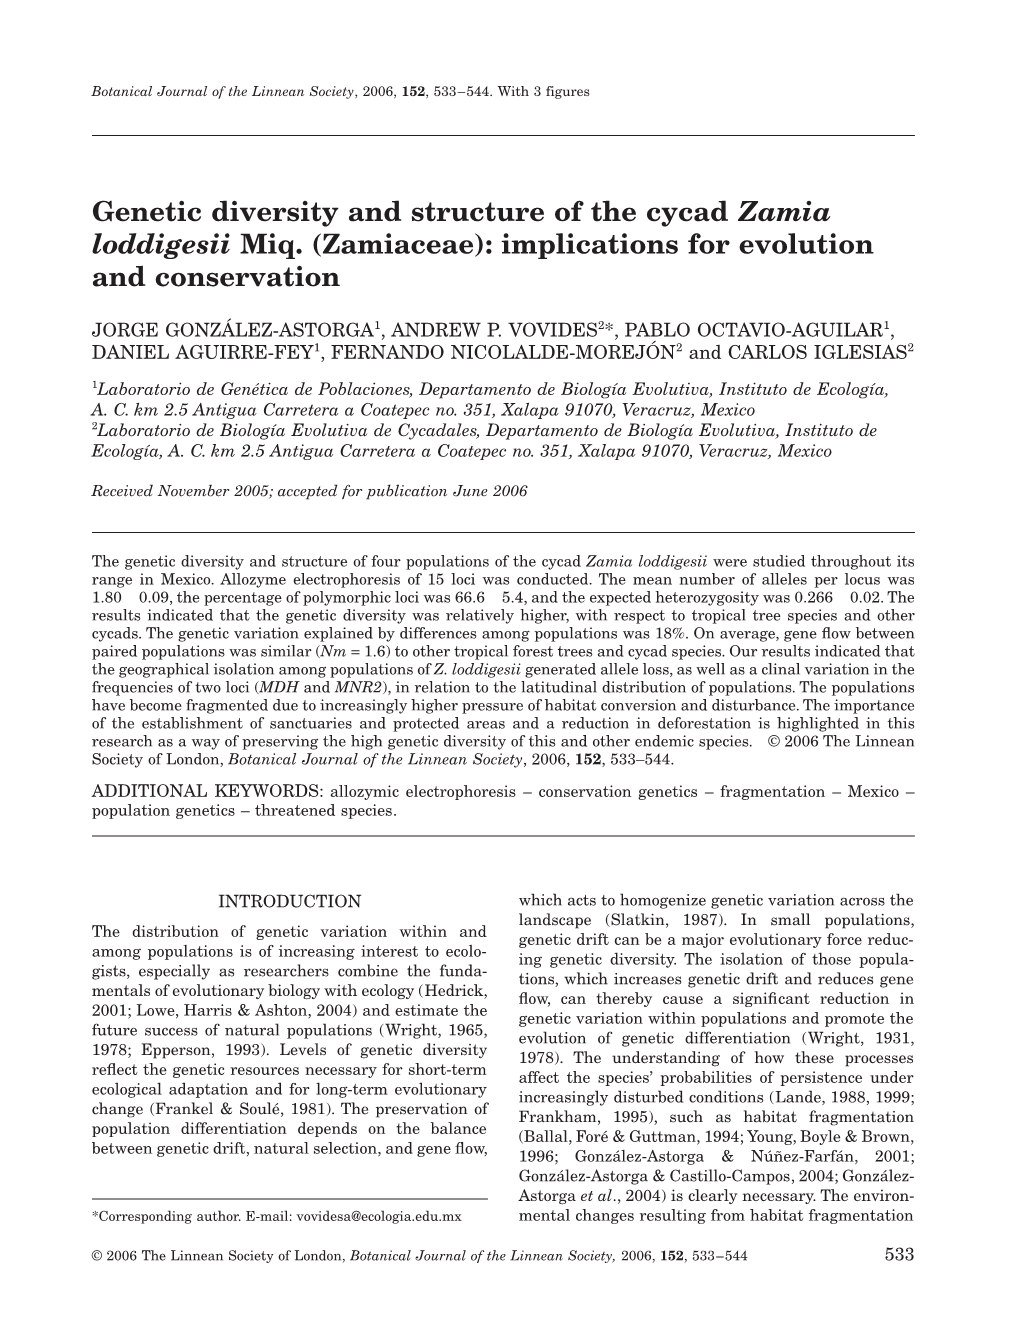 Genetic Diversity and Structure of the Cycad Zamia Loddigesii Miq. (Zamiaceae): Implications for Evolution and Conservation